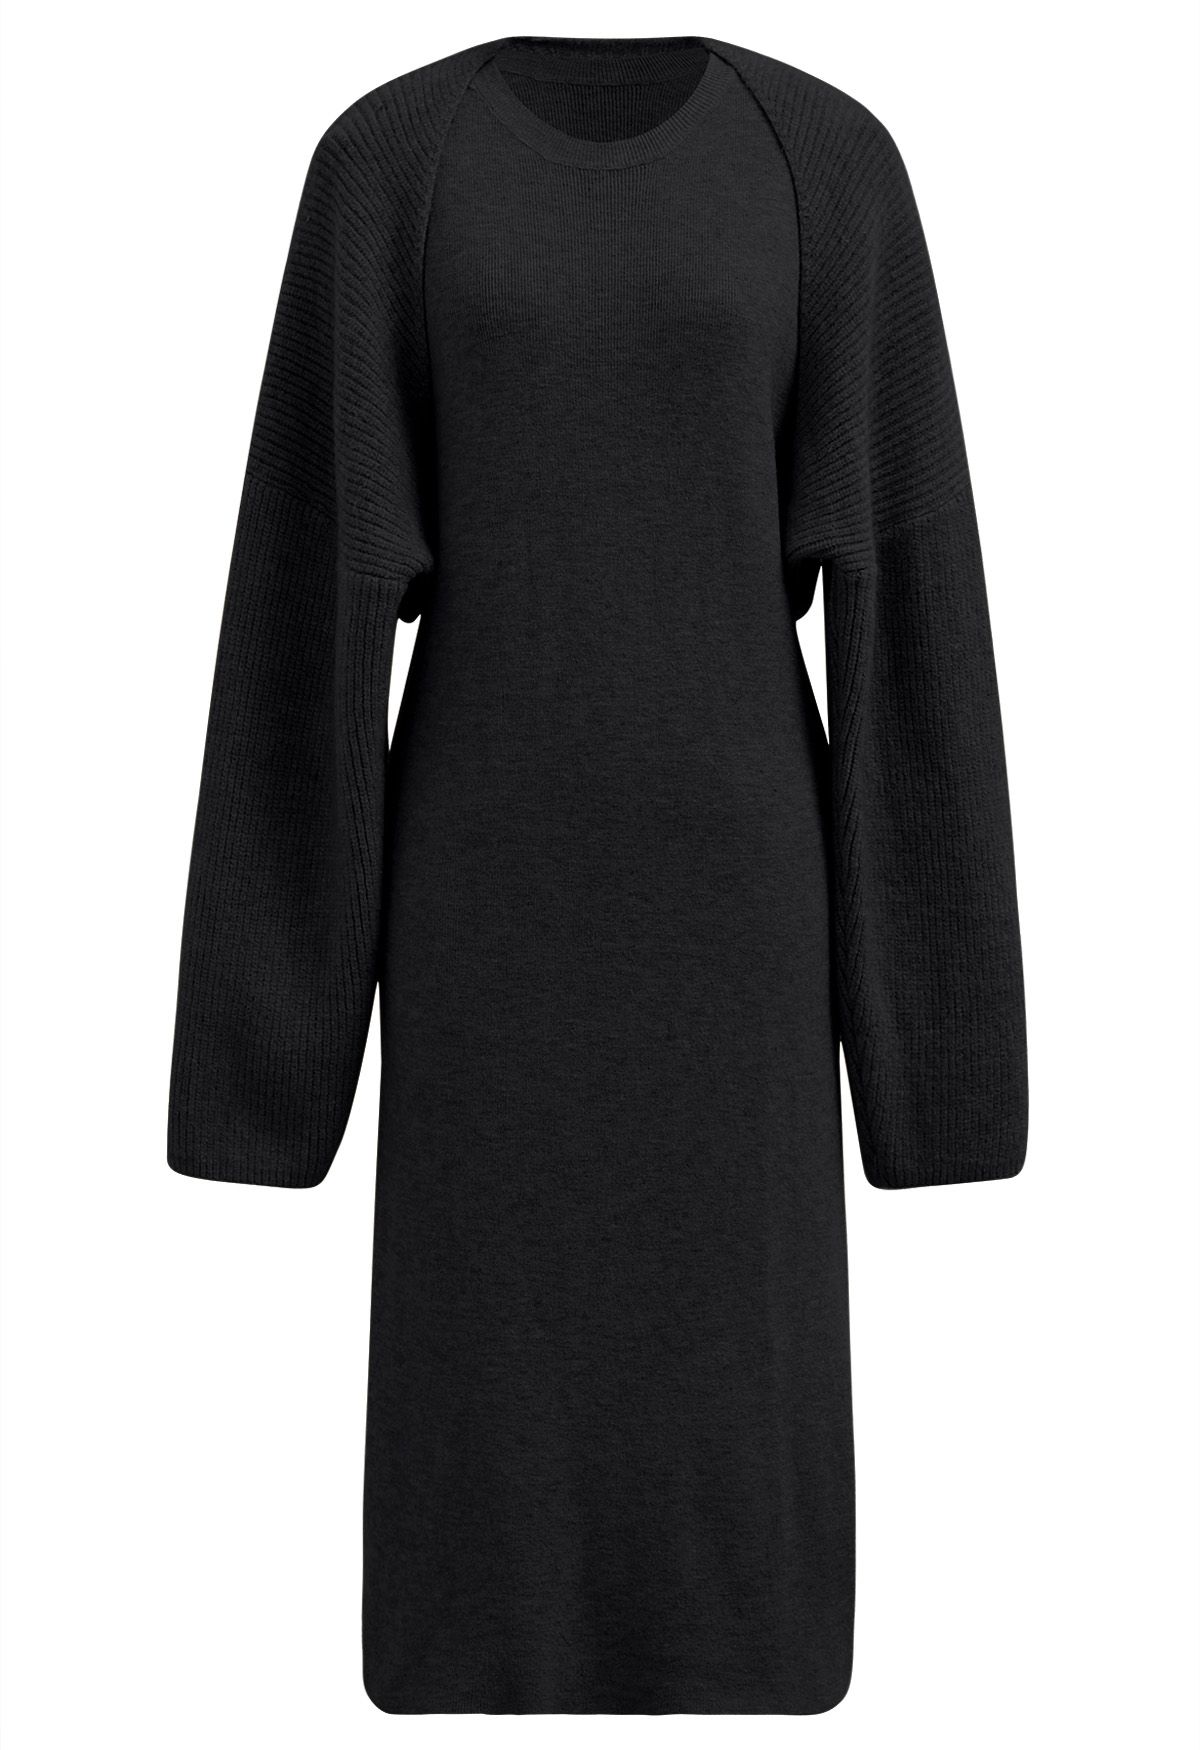 Casual Wool-Blend Sleeveless Knit Dress and Sweater Sleeve Set in Black